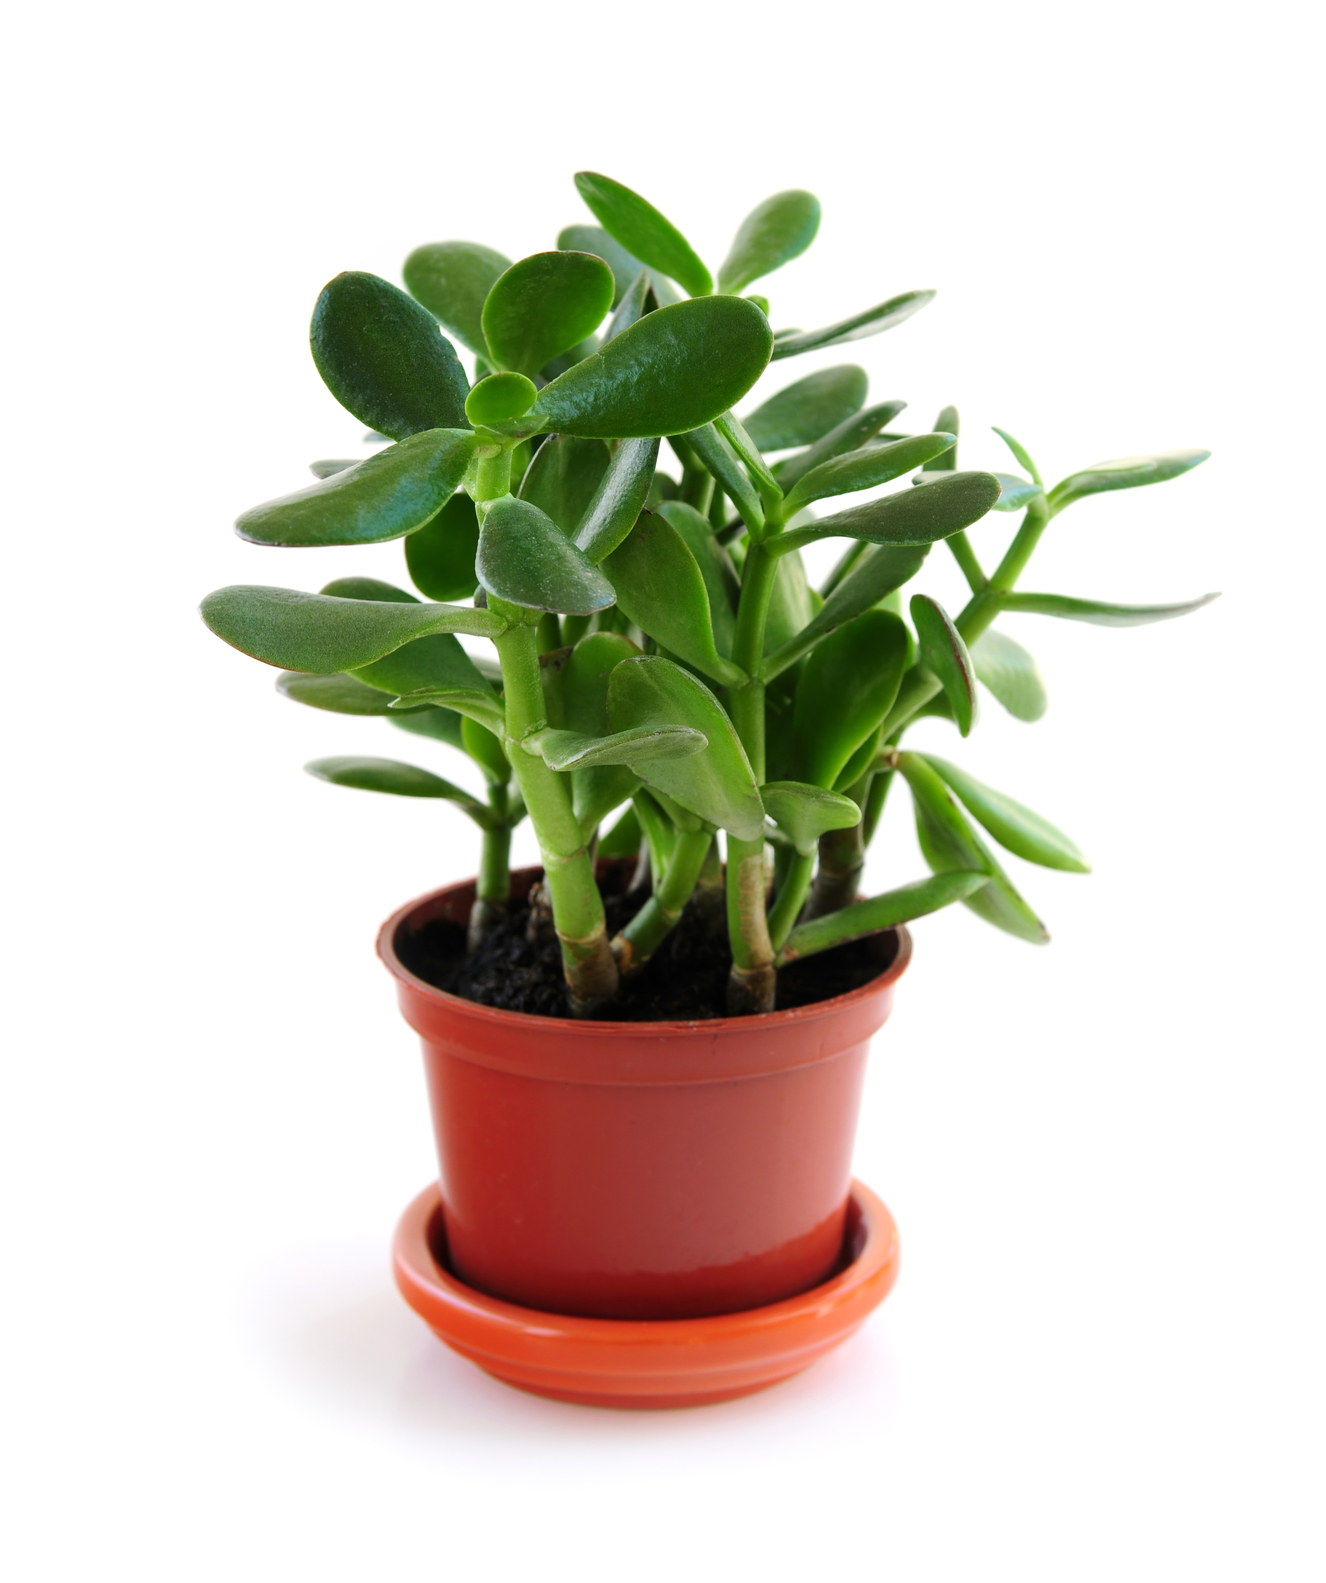 Jade Plants: How to Plant, Grow, and Care for Jade Plants | The Old ...